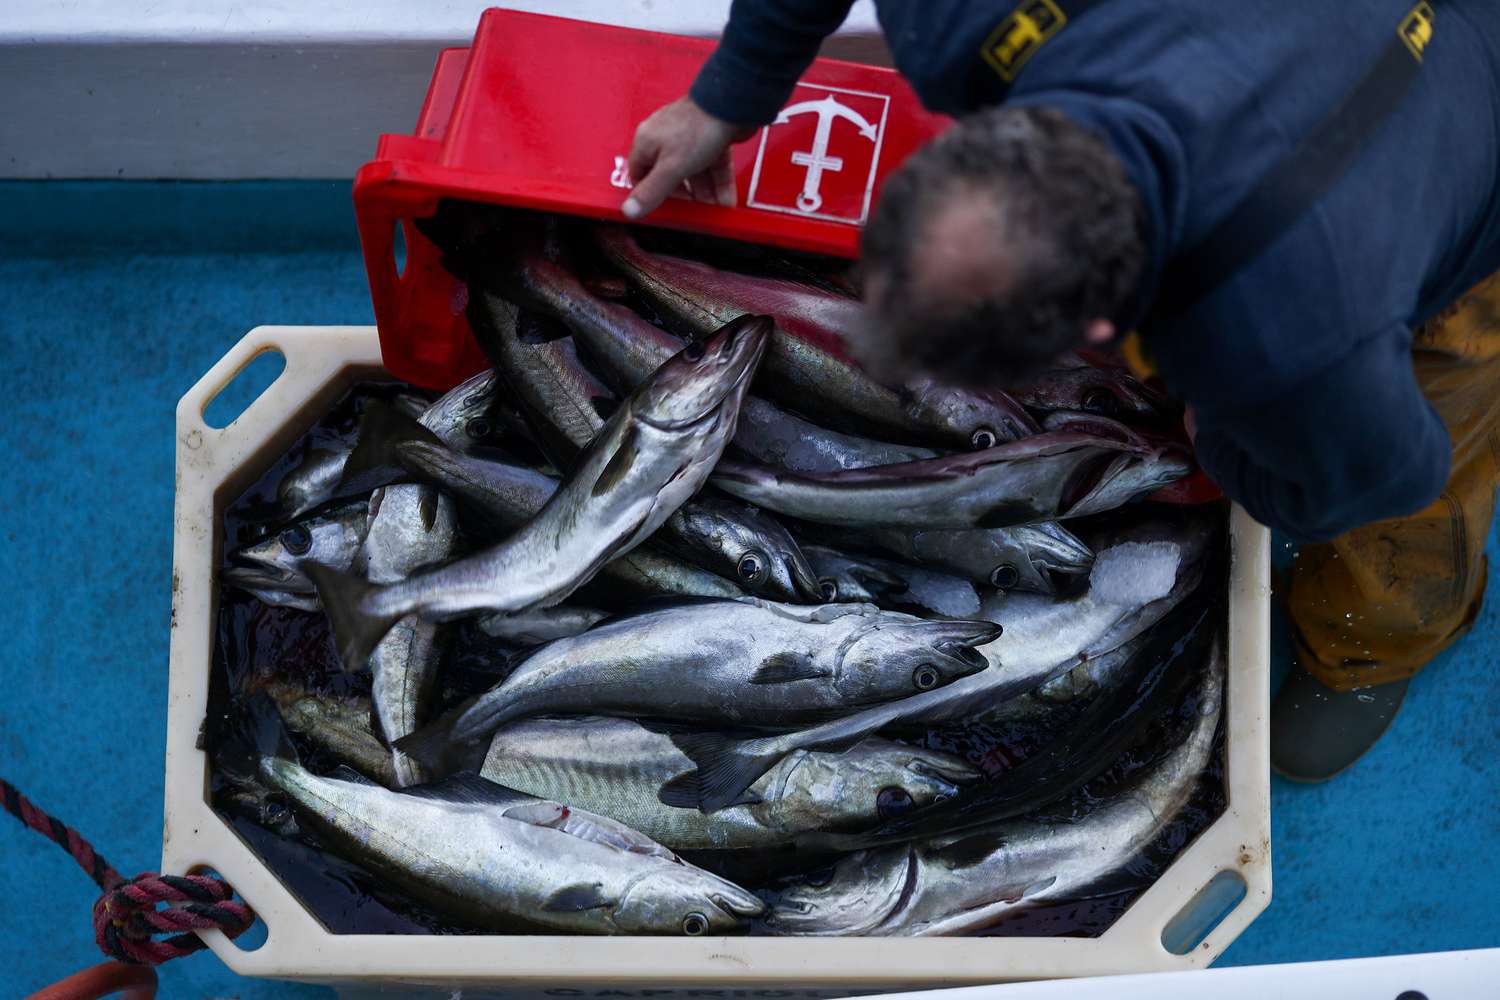 Fishing worker placing fish in a tote to be sold after Bexit